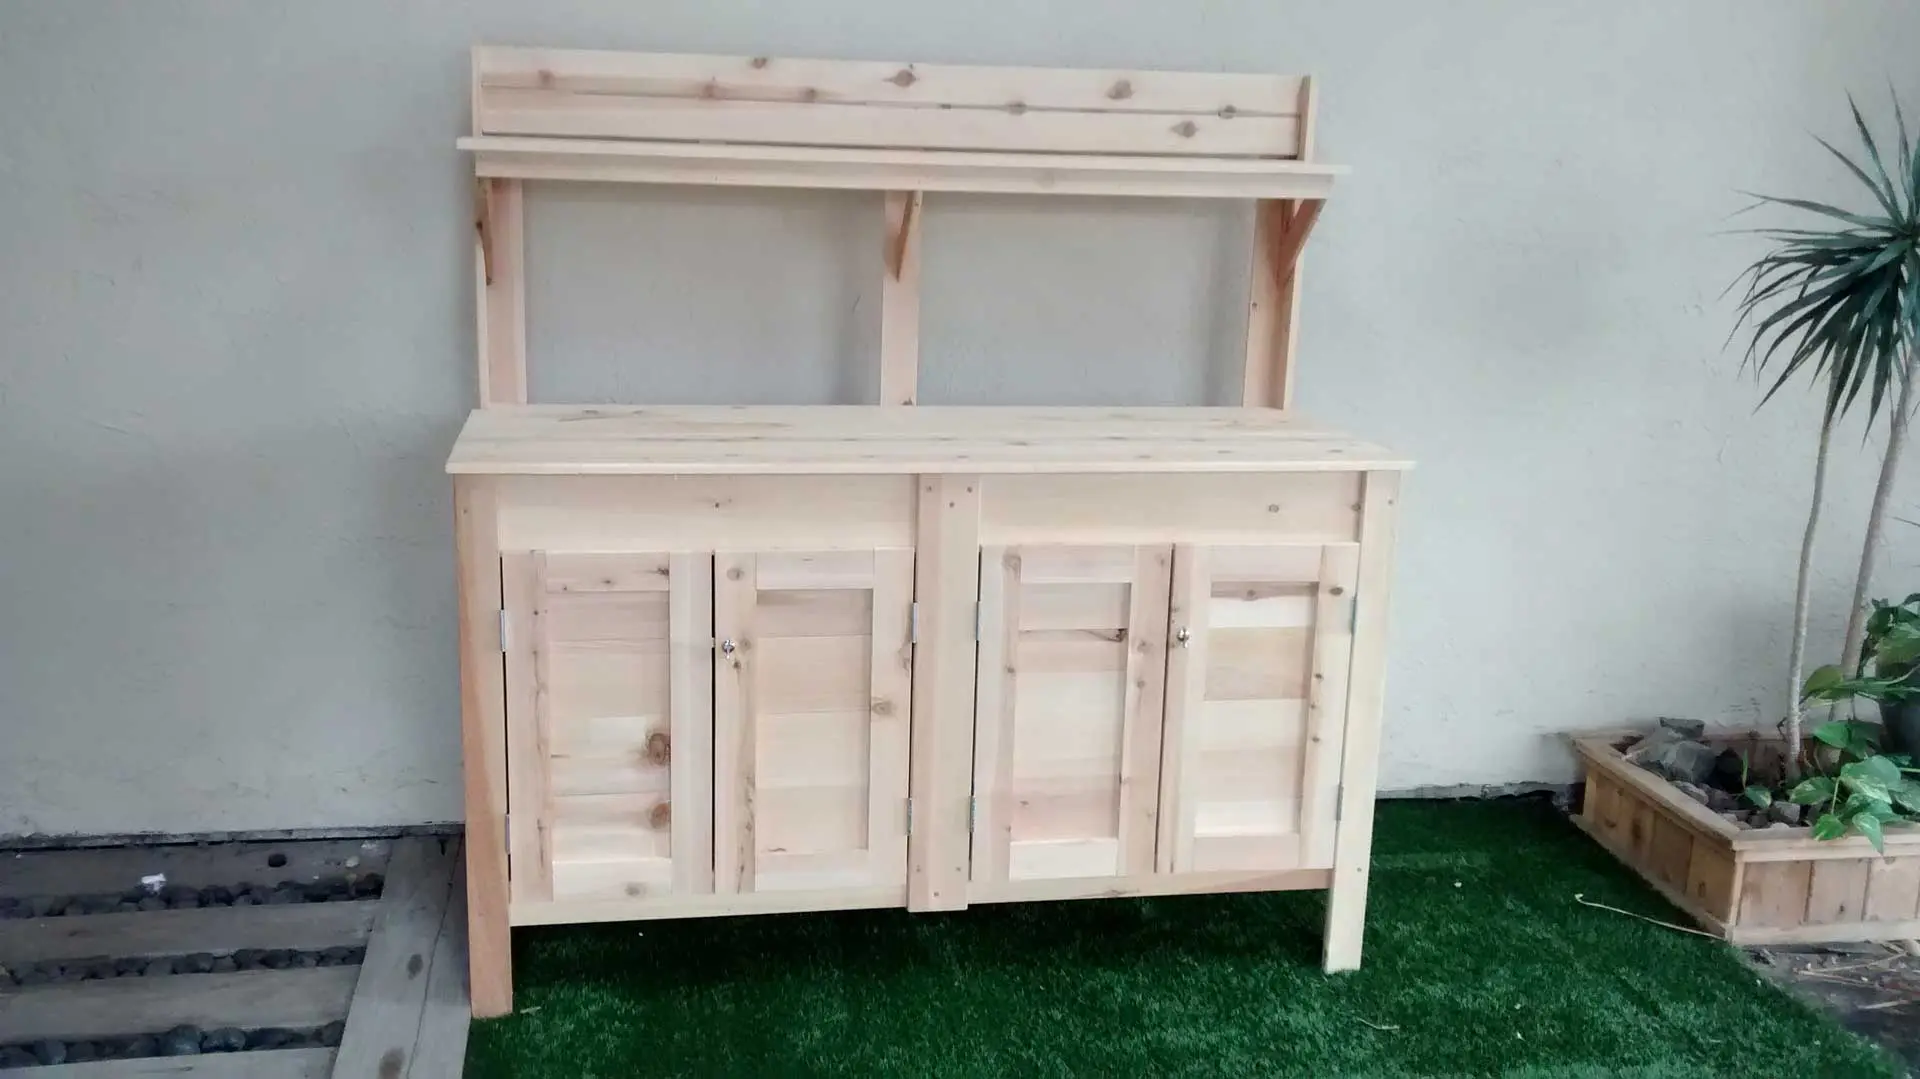 A wooden planter with two doors and two drawers.